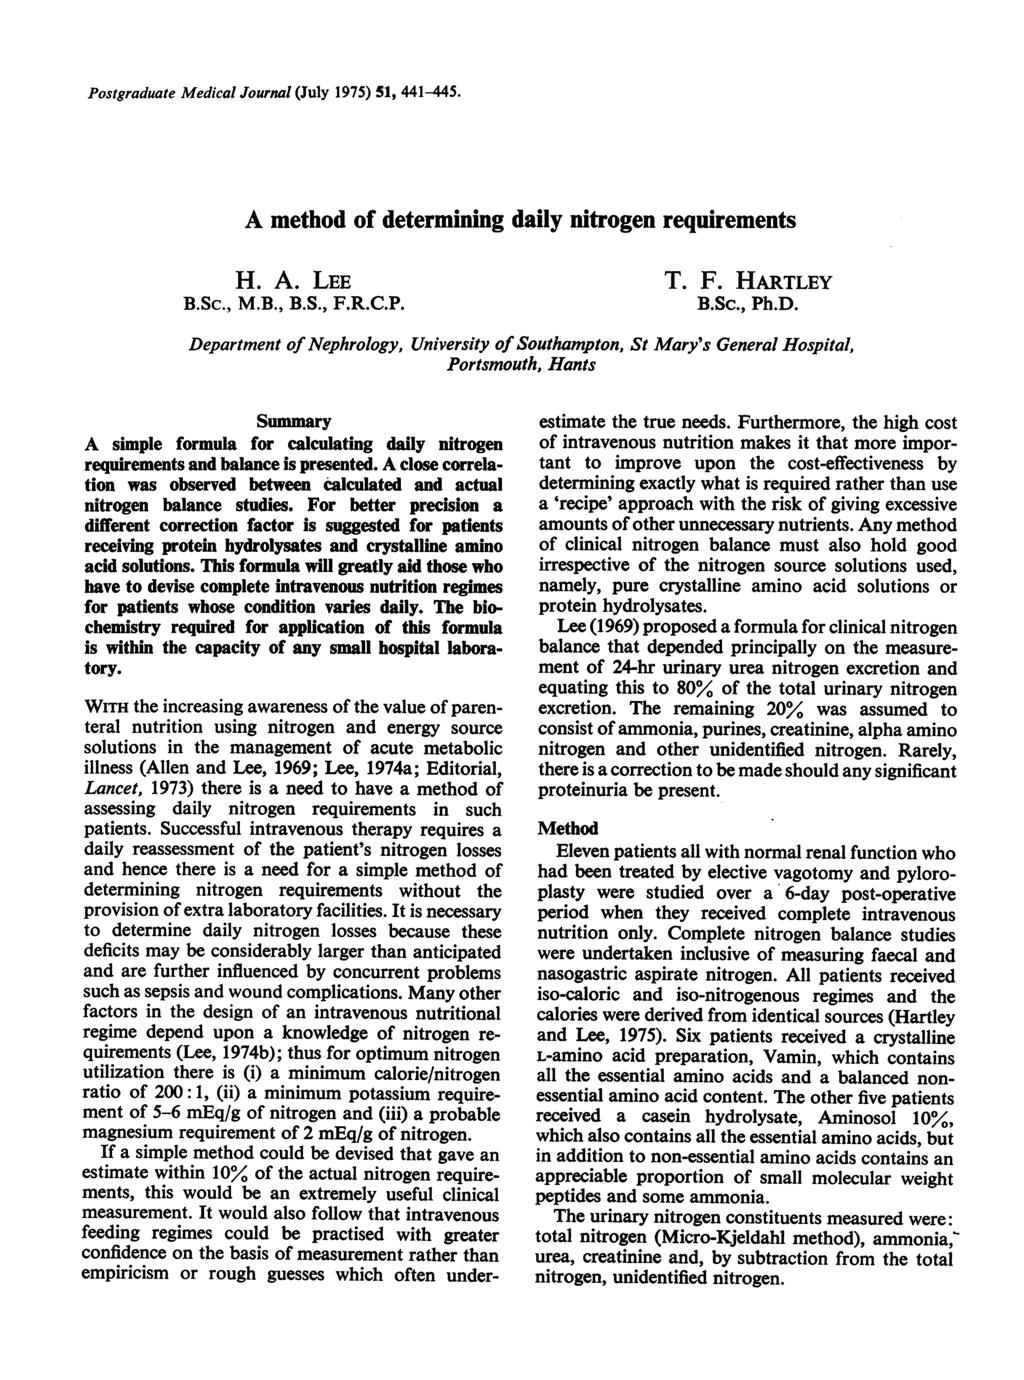 Postgraduate Medical Journal (July 1975) 51, 441-445. A method of determining daily nitrogen requirements H. A. LEE B.Sc., M.B., B.S., F.R.C.P. T. F. HARTLEY B.Sc., Ph.D.